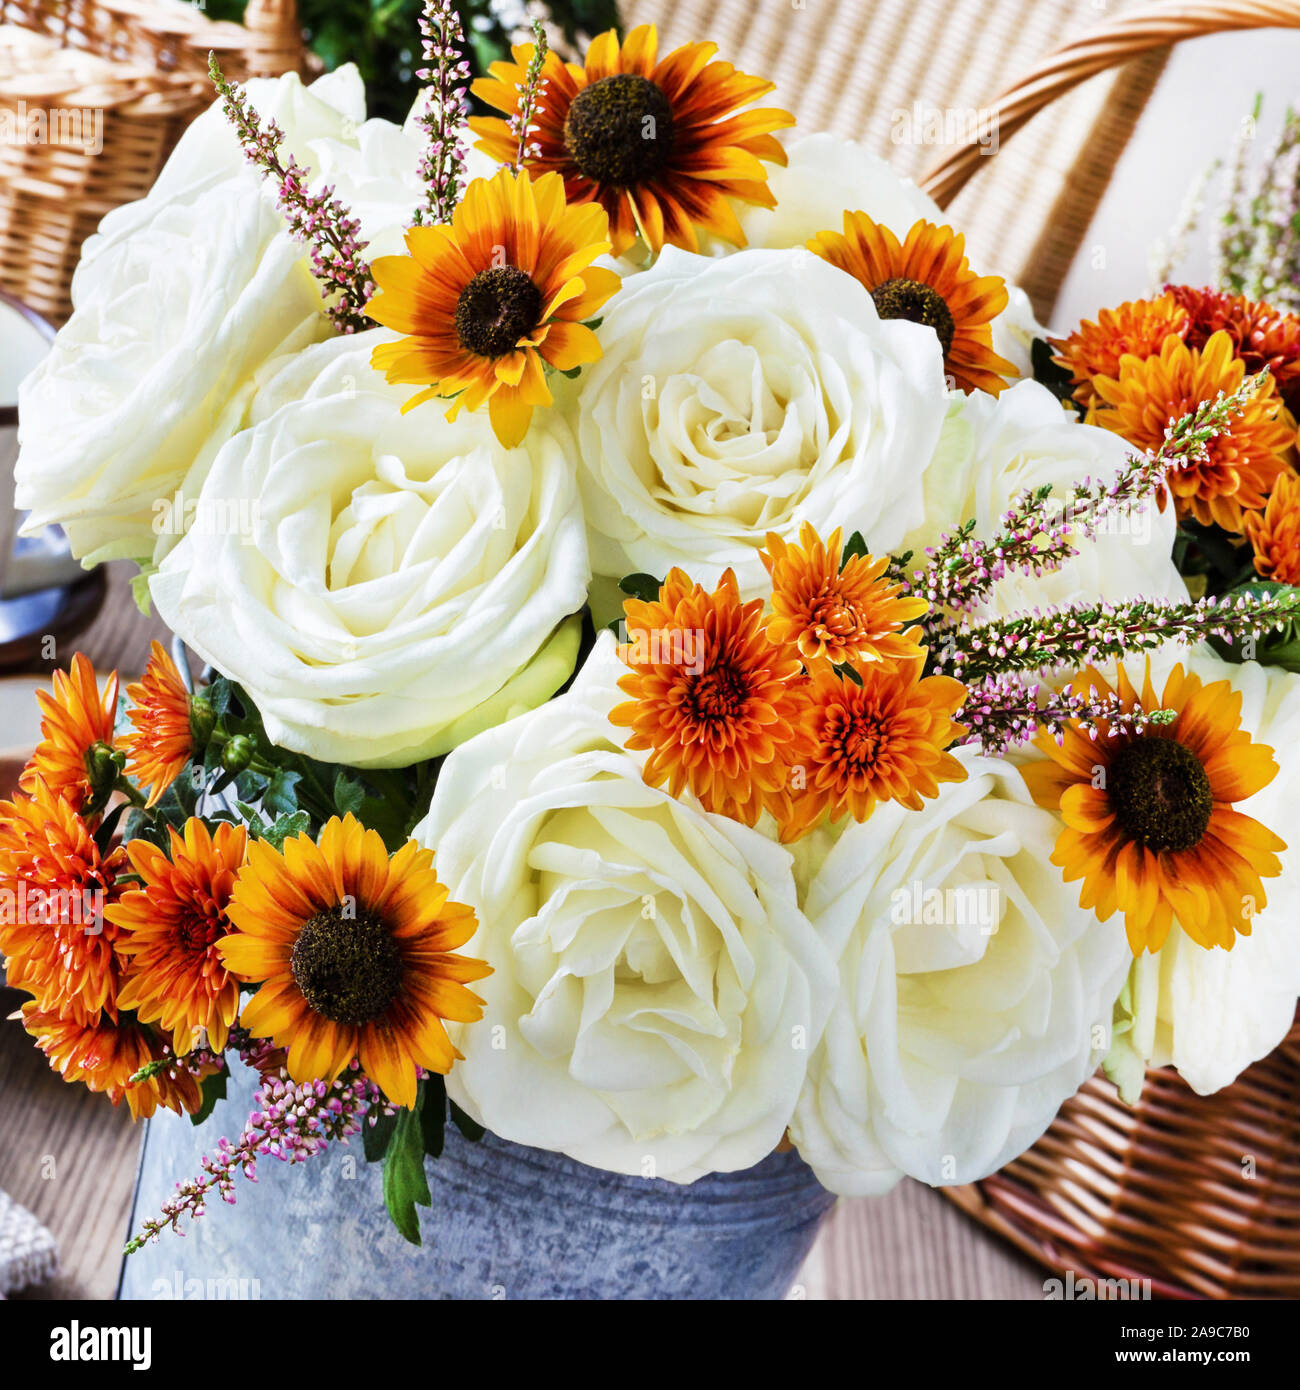 Autmn decorations and white roses bouquet in basket Stock Photo